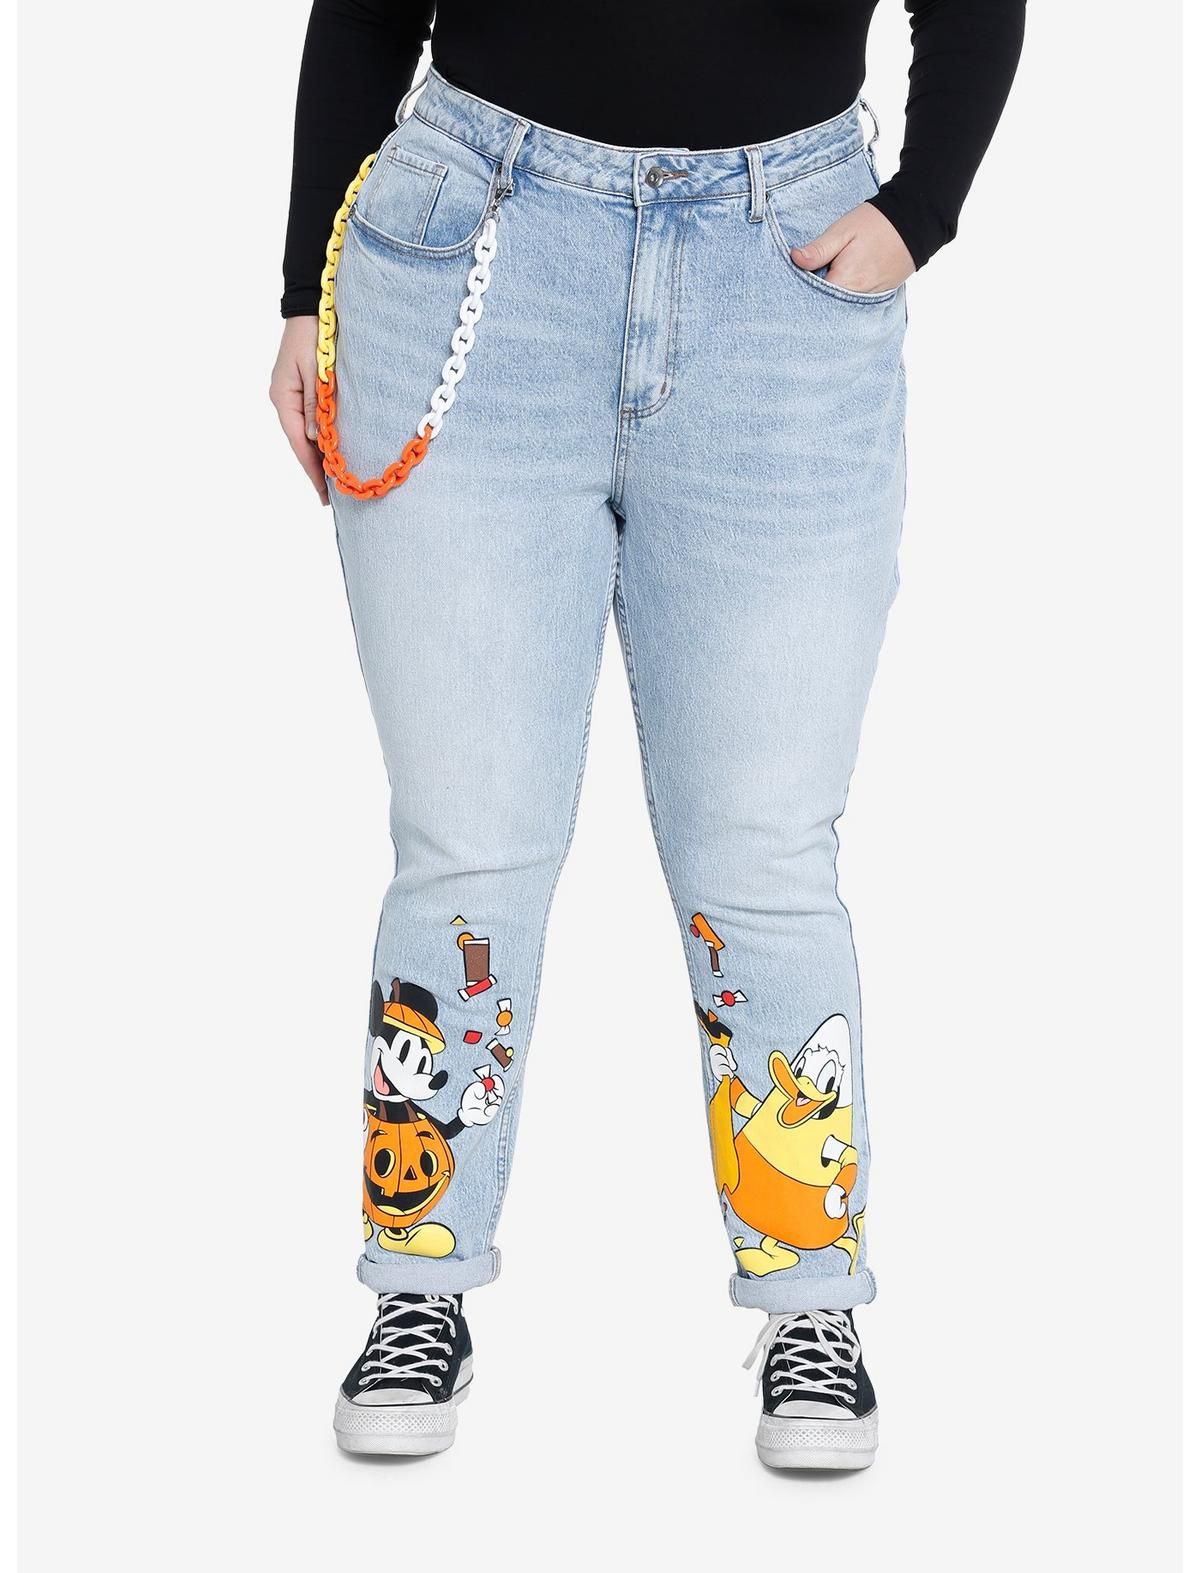 Her Universe Disney Halloween Candy Corn Chain Mom Jeans | Hot Topic | Hot Topic